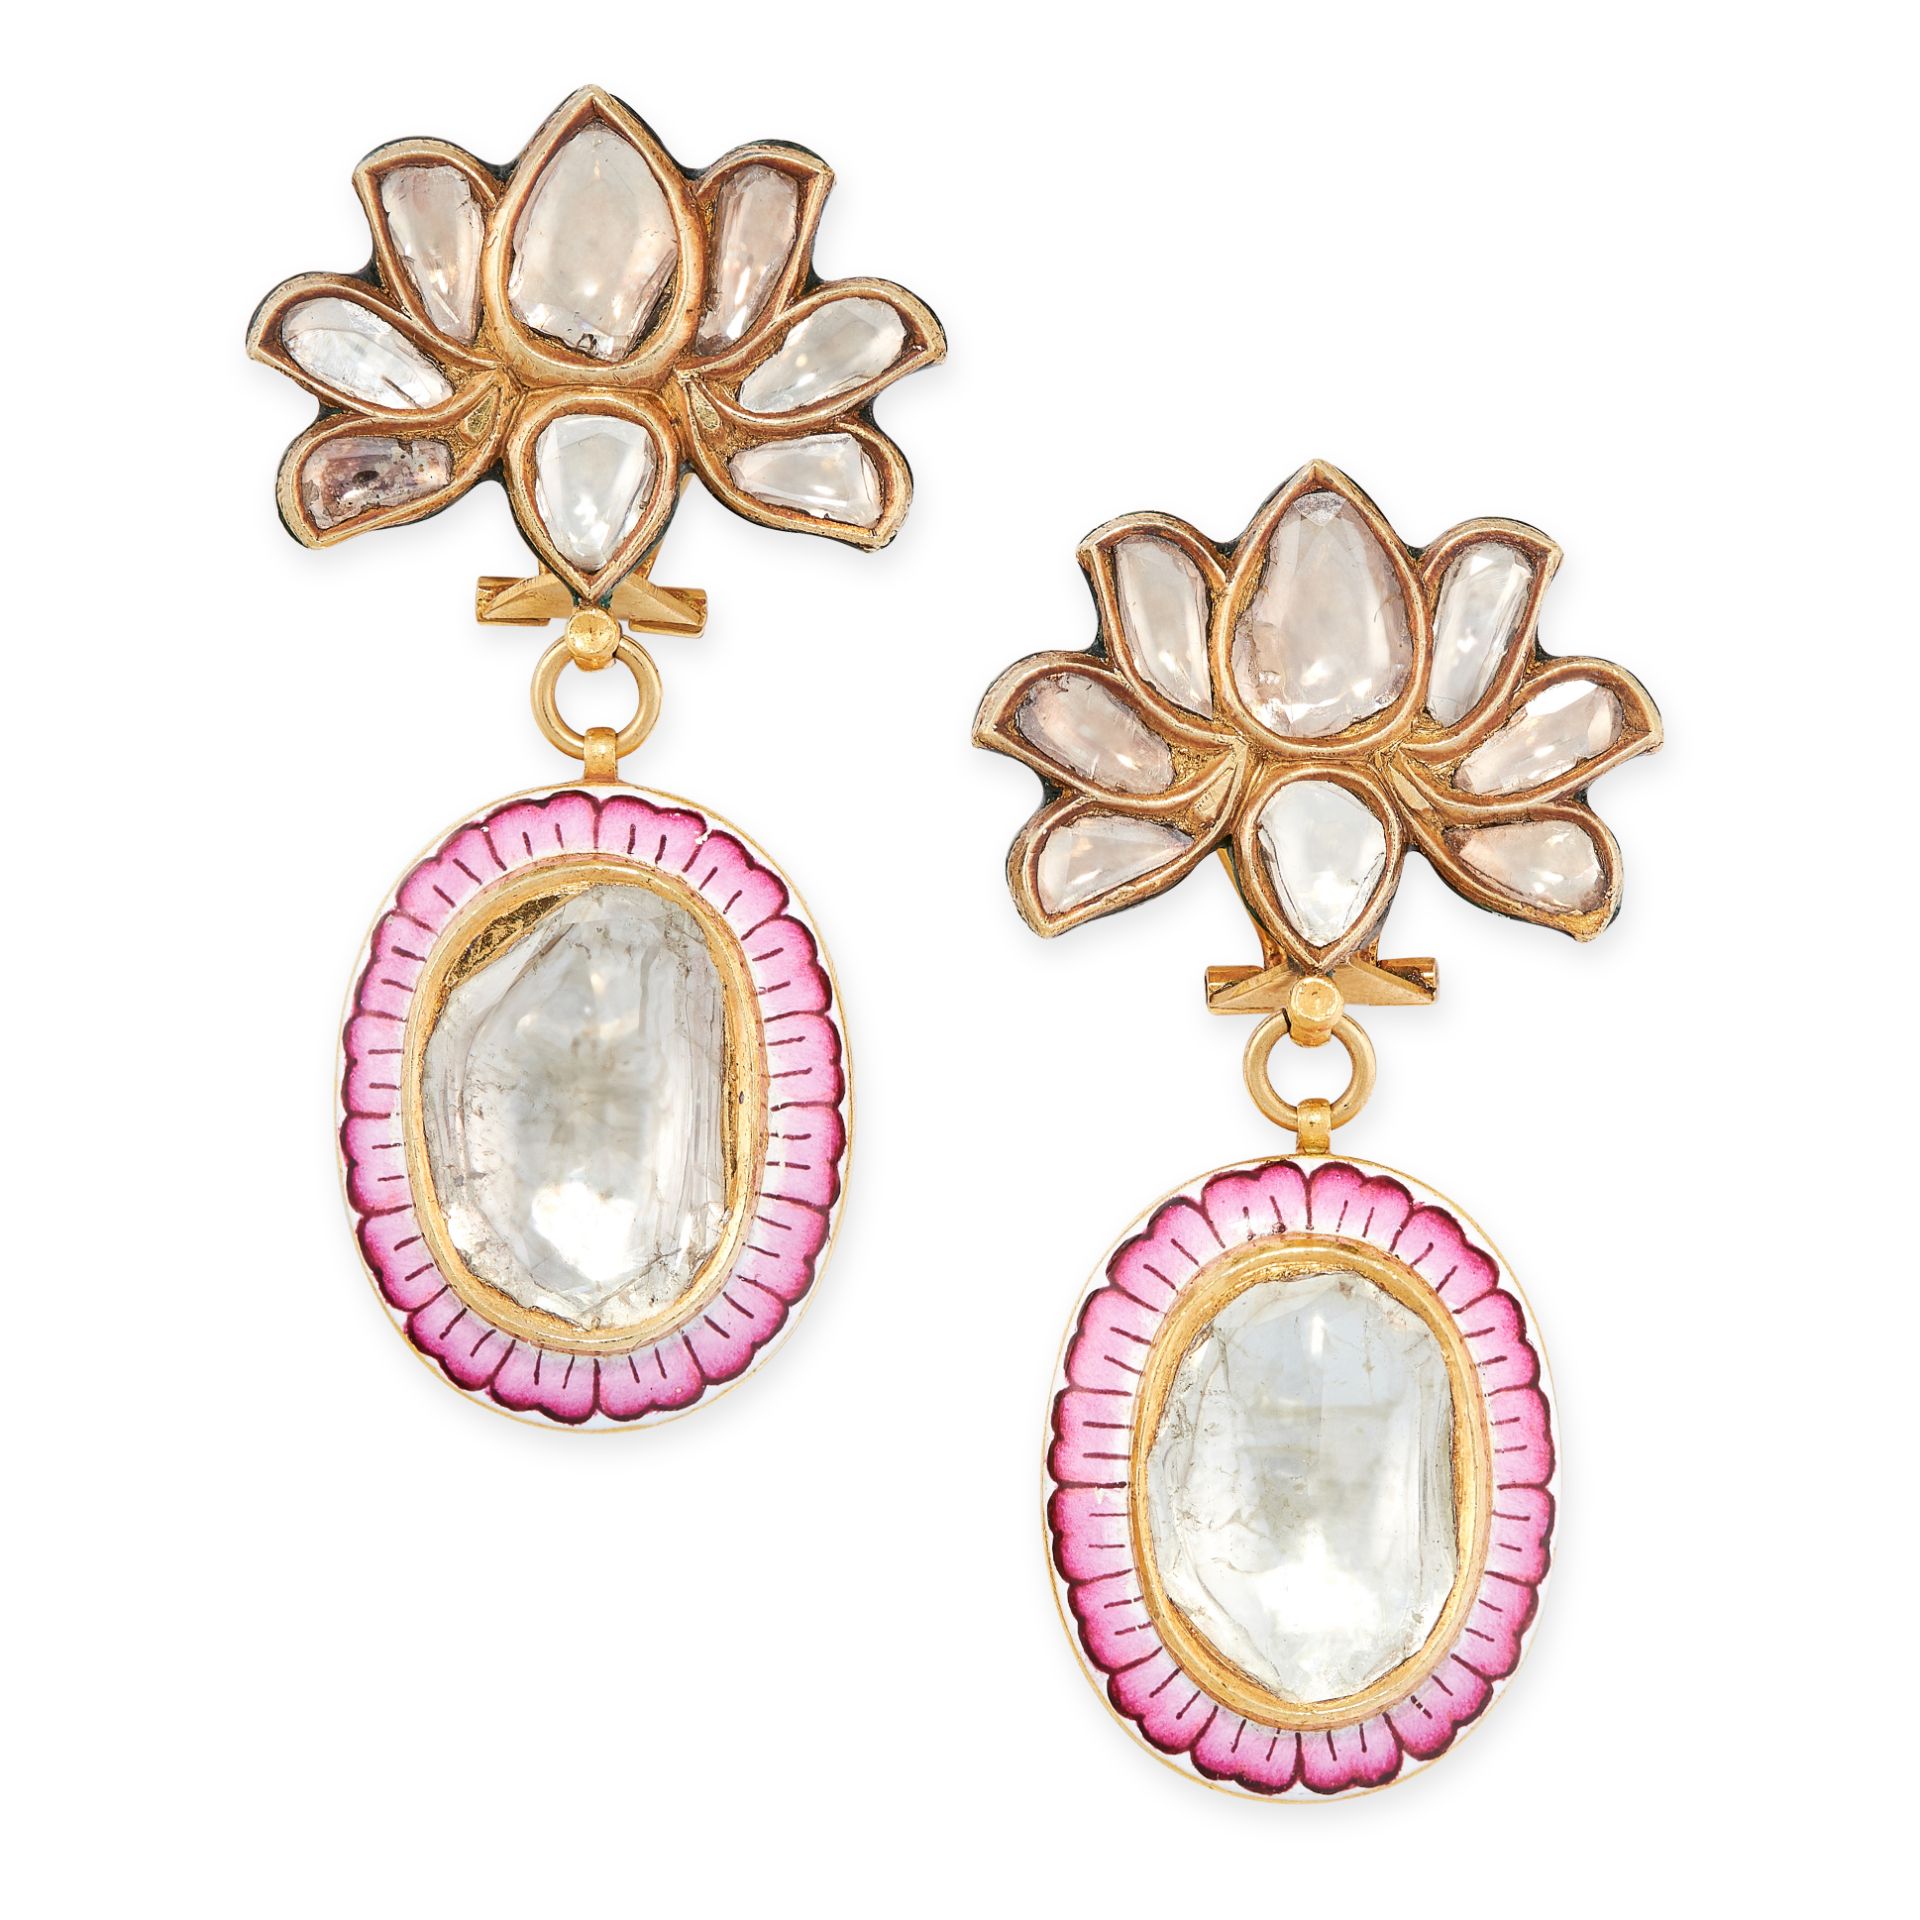 A PAIR OF DIAMOND AND ENAMEL CLIP EARRINGS in yellow gold, the articulated bodies set with large